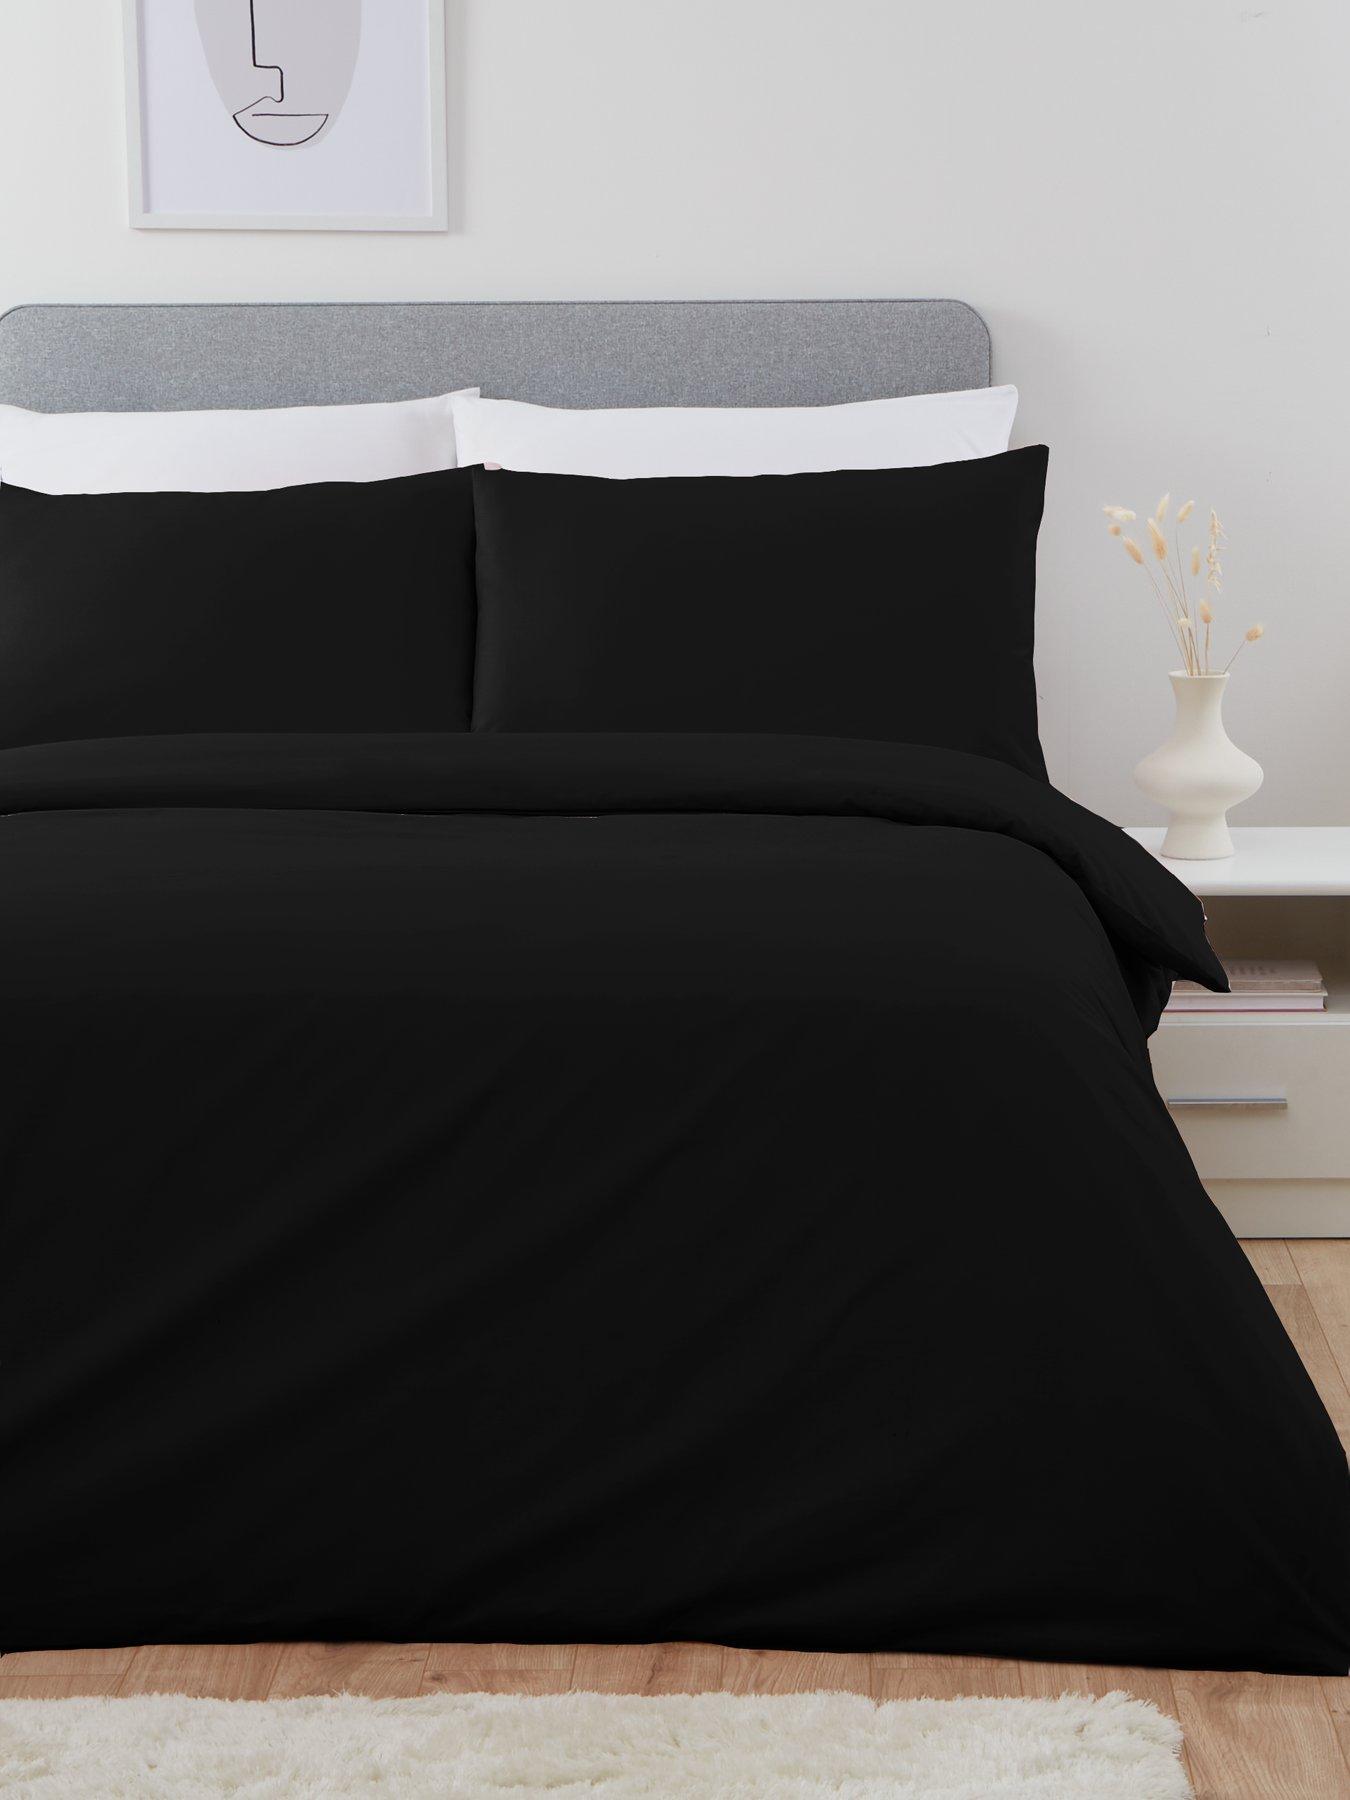 Low Cost Flame Retardent Pillowcases BS7175 Best Quality With Price Promise  Guarantee